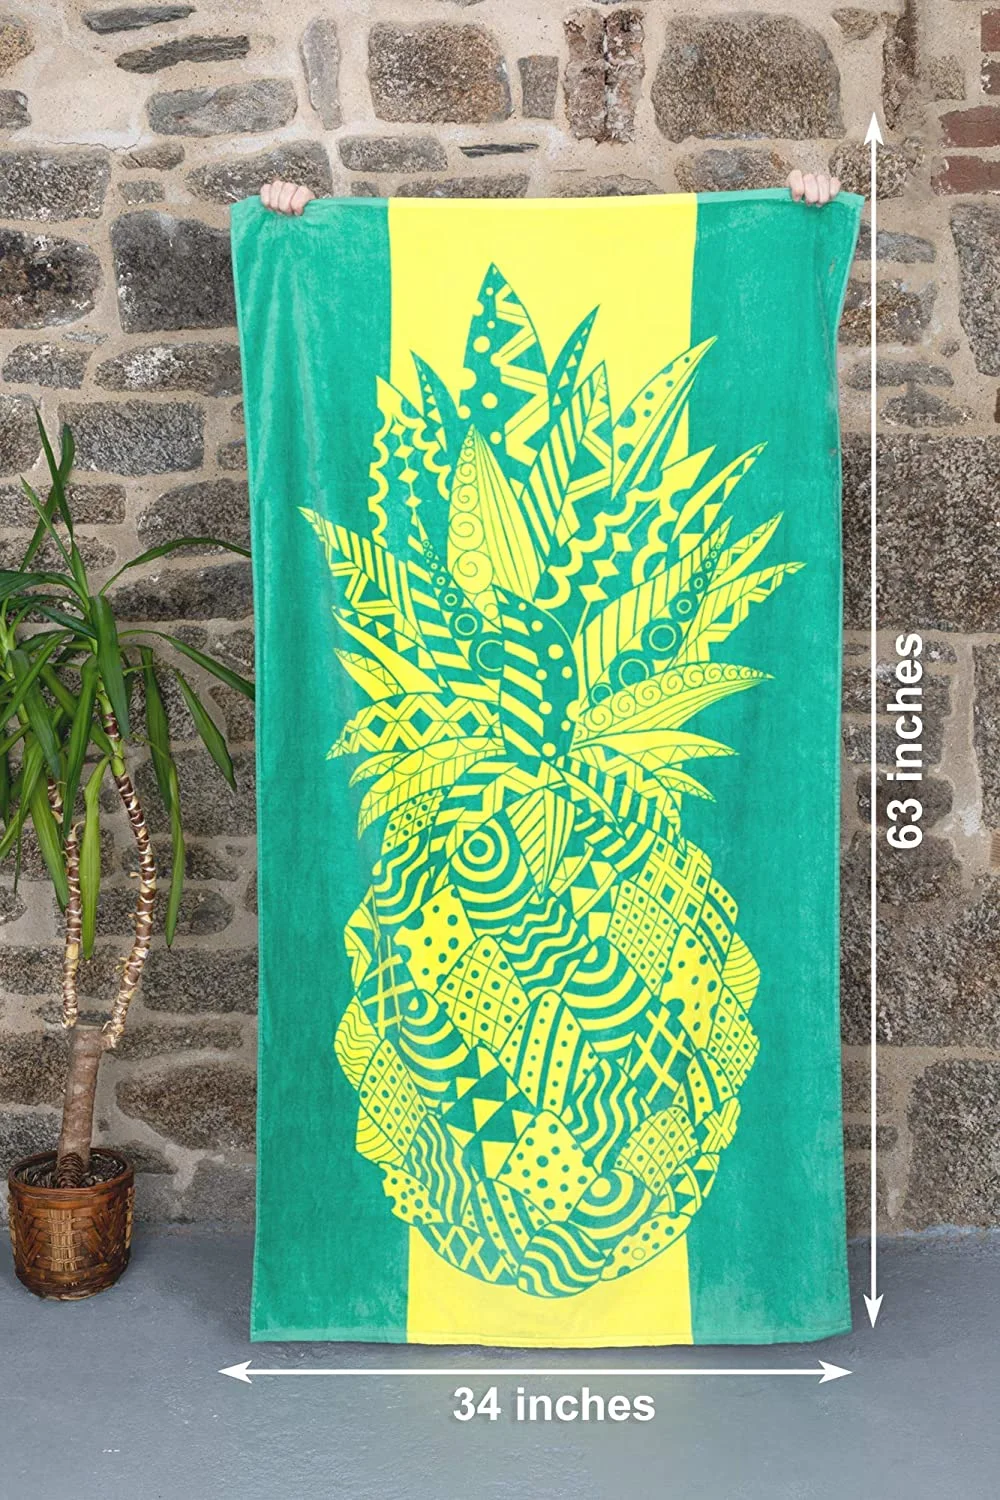 Oversized Beach Towel, 30”X60” Printed Large Cotton Beach Towels, Super Absorbent, Quick Drying Pool Towels for Beach, Swimming, Traveling, Flower